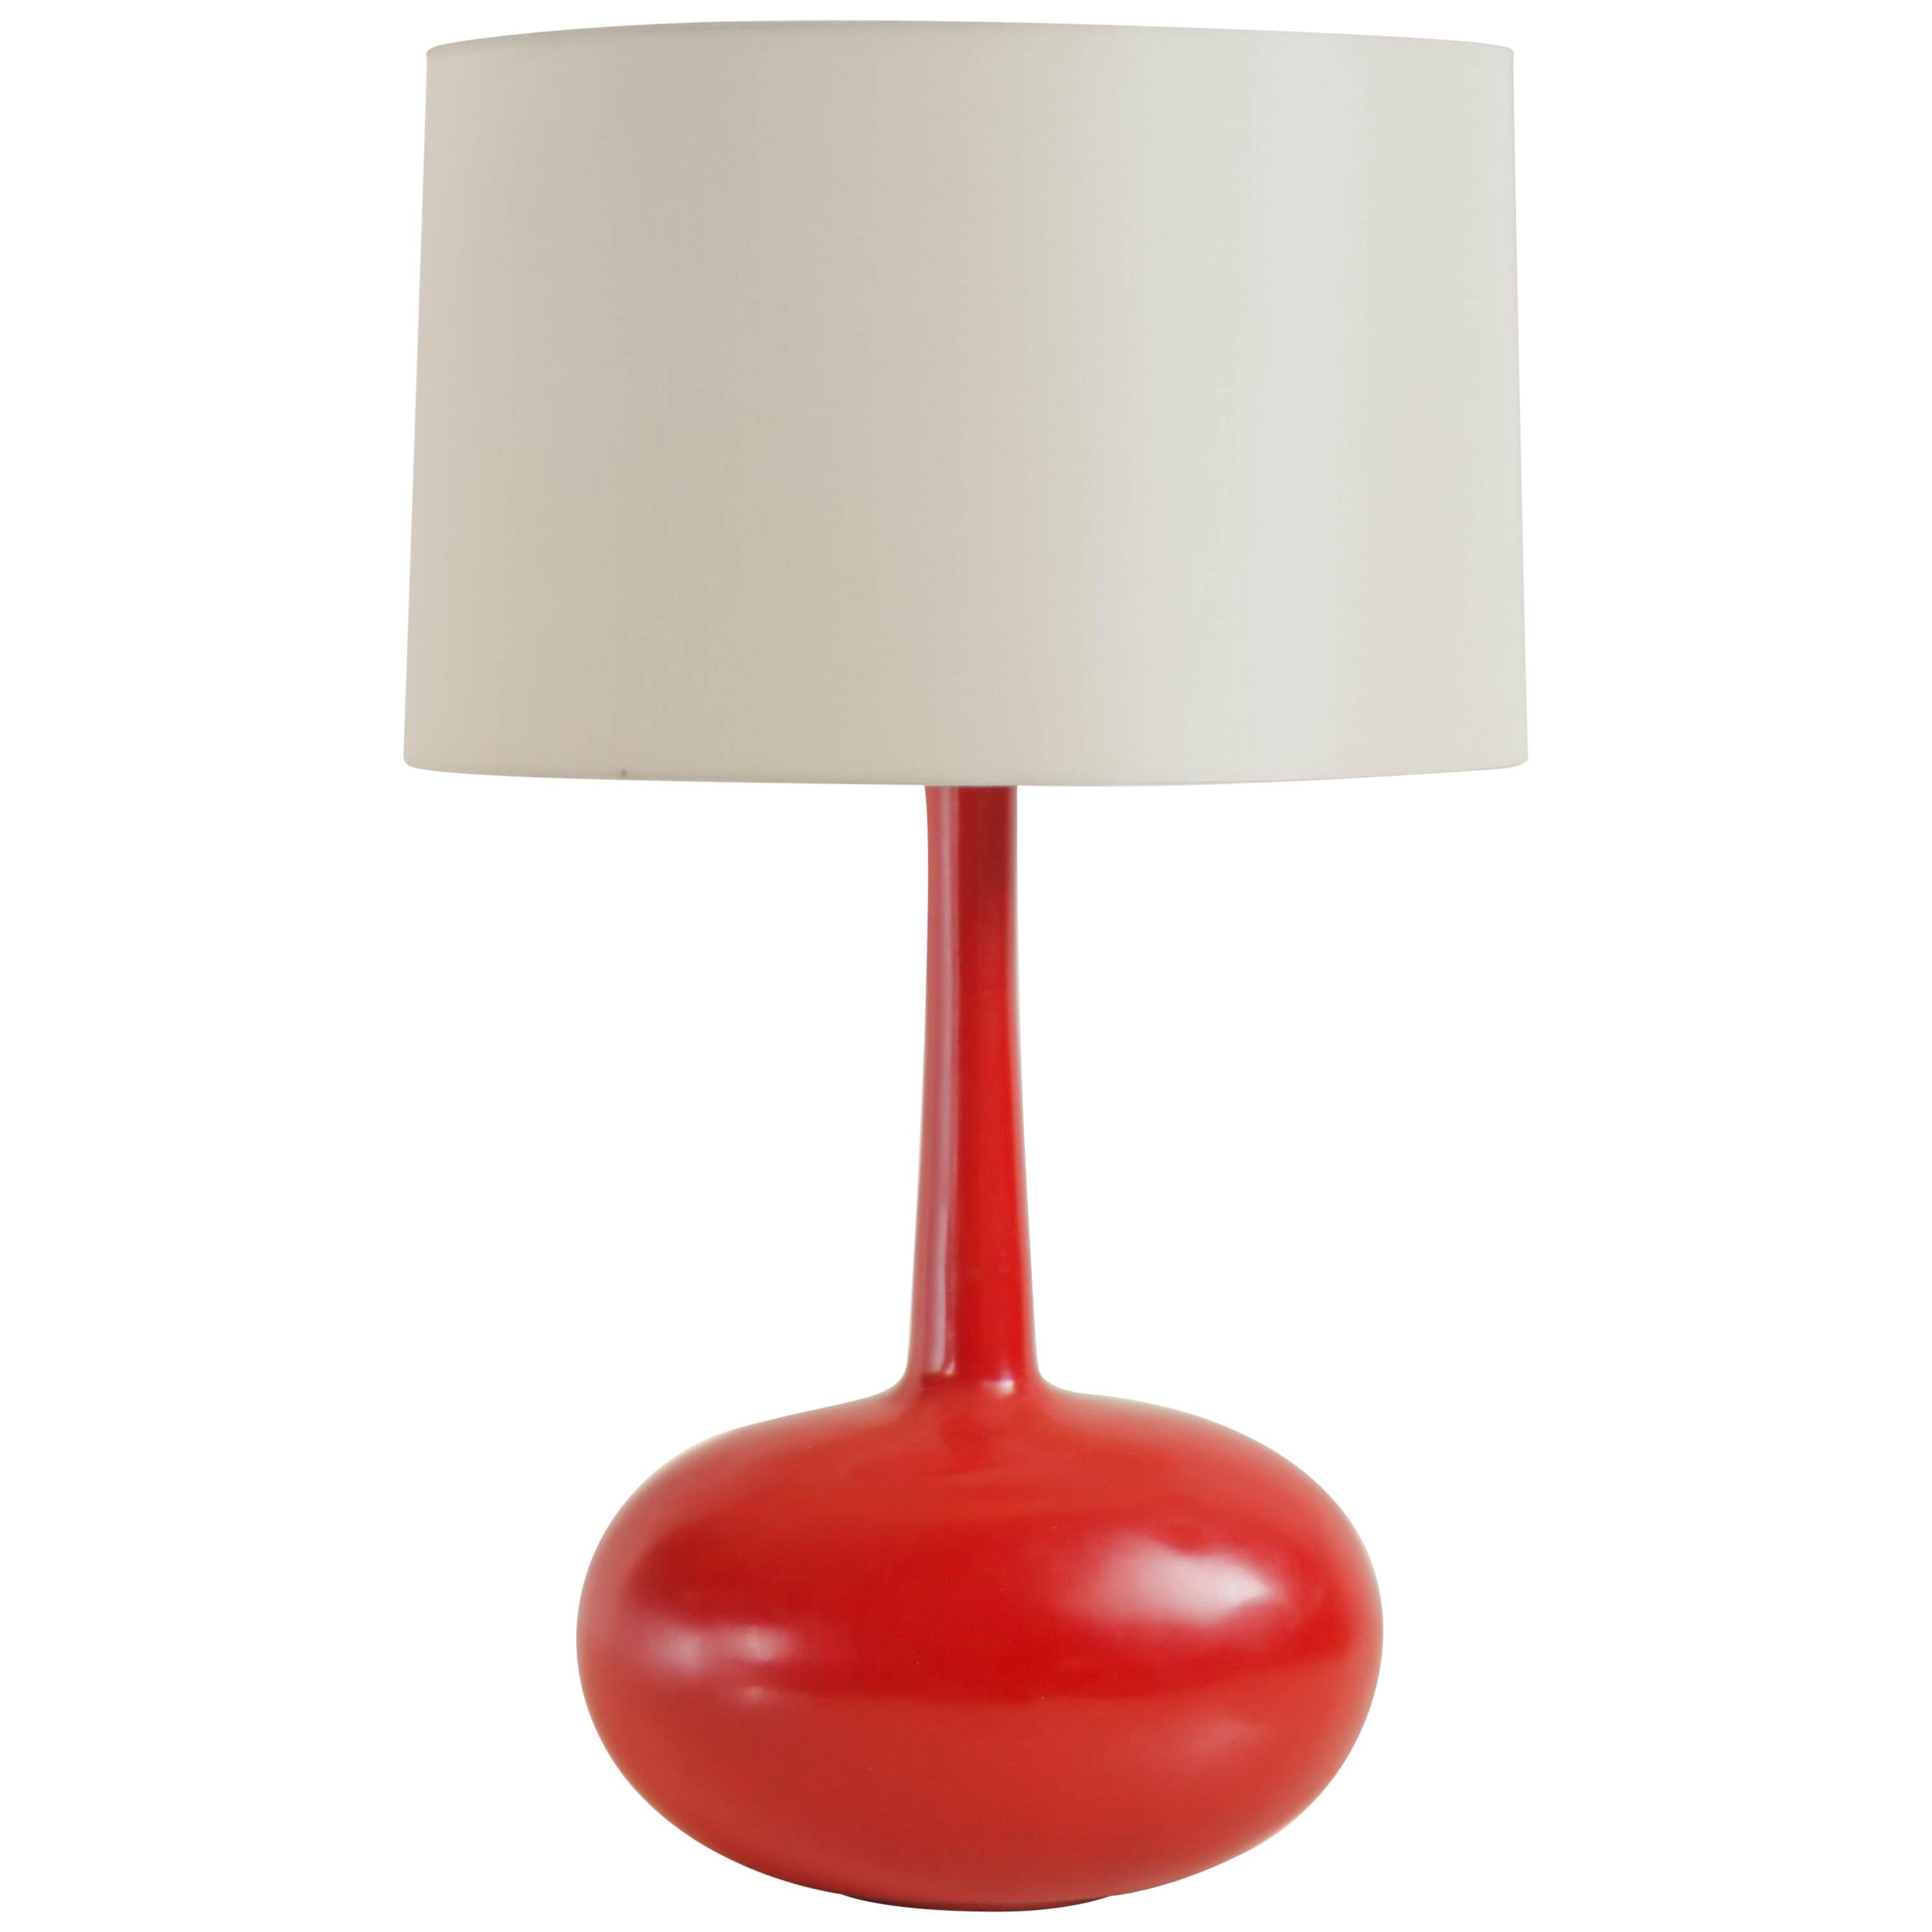 Tall Cocoon Table Lamp, Red Lacquer by Robert Kuo, Hand Repousse, Limited For Sale